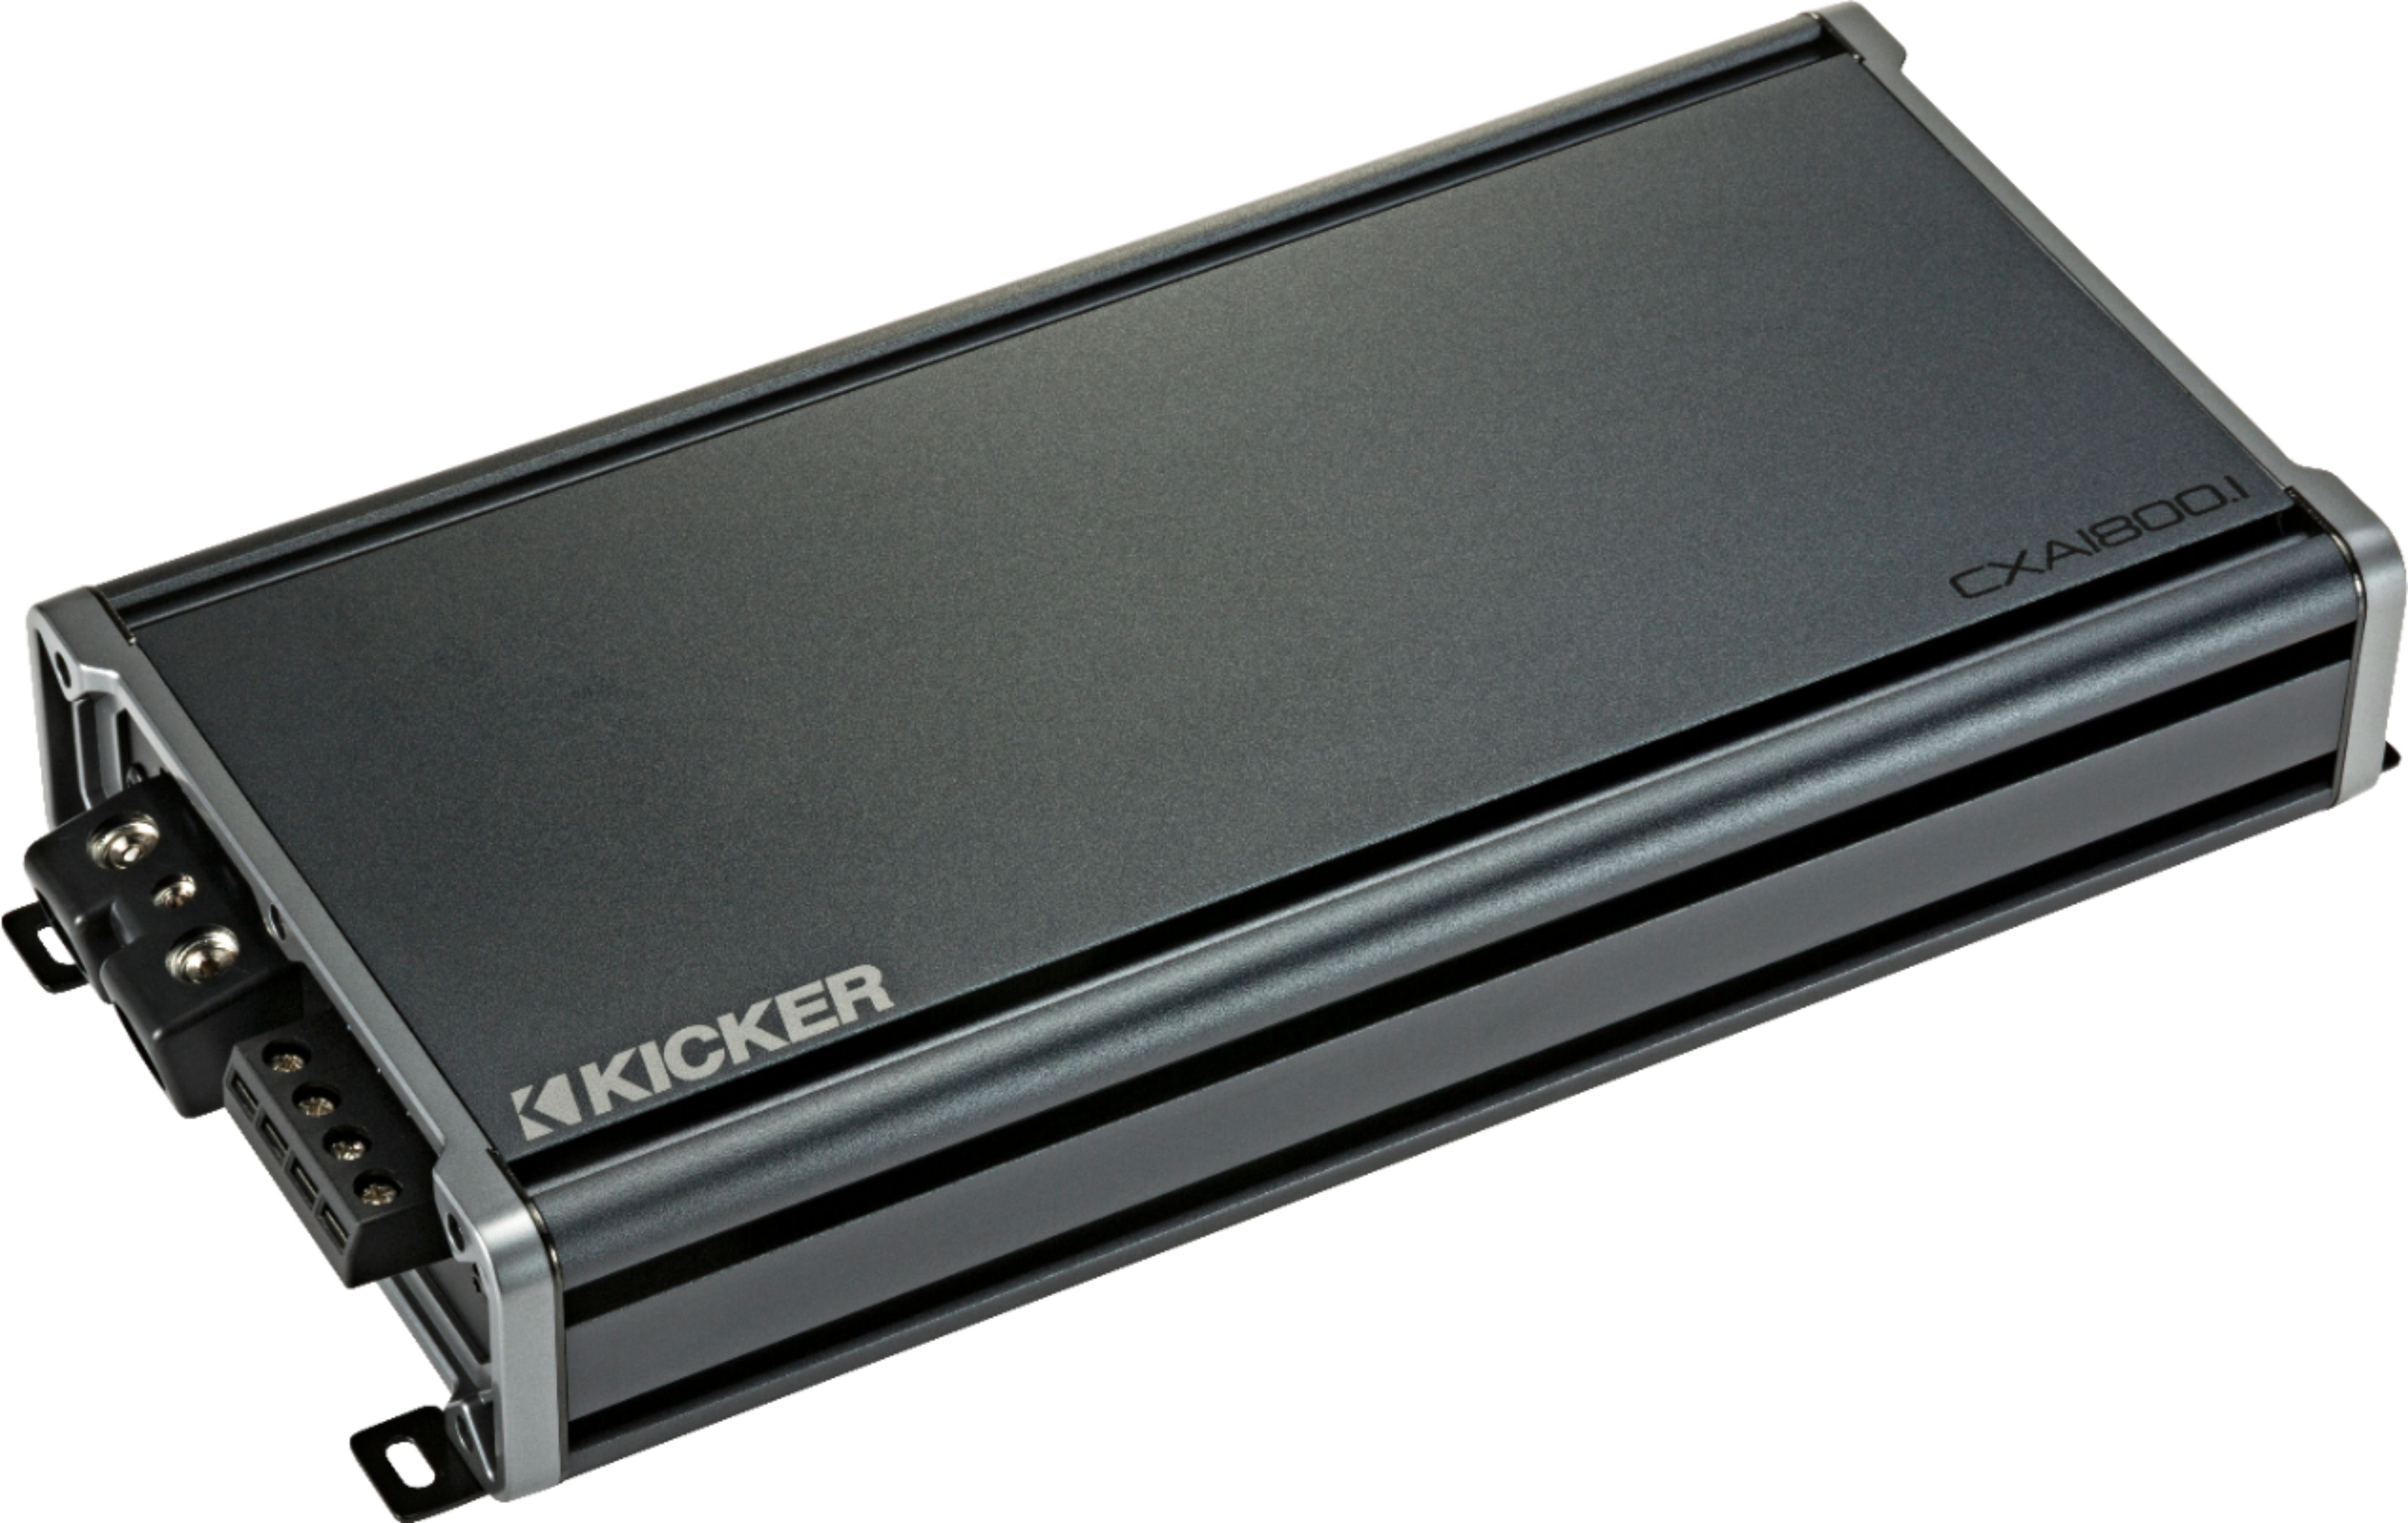 Angle View: KICKER - CX 1800W Class D Digital Mono Amplifier with Variable Low-Pass Crossover - Gray